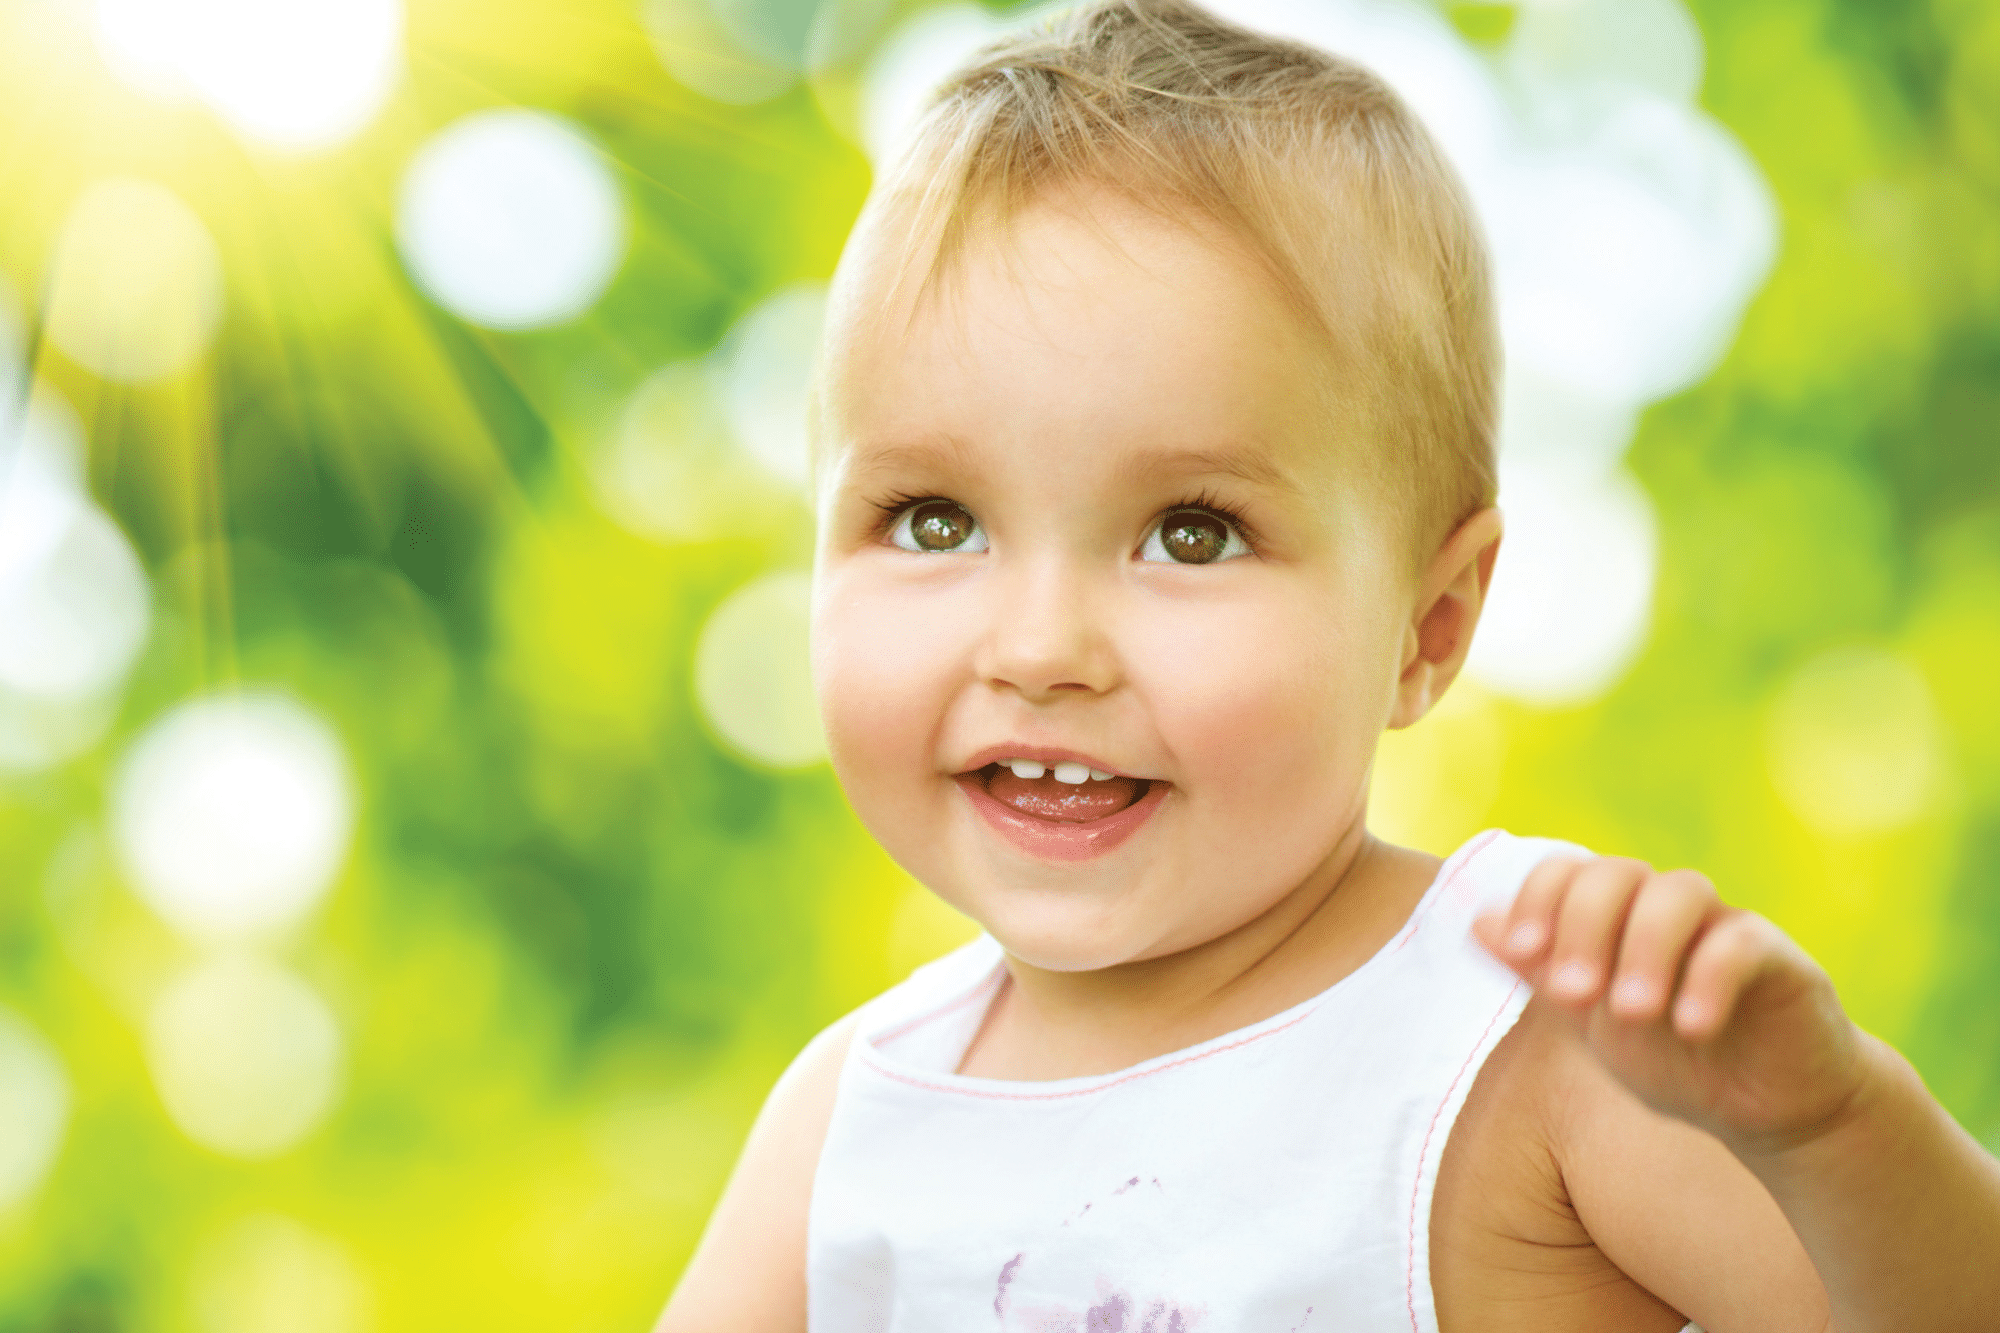 Start Early: Why Dentistry for Toddlers Matters Dentist in Princeton. Montgomery Pediatric Dentistry. Pediatric, Restorative, Preventative Dentistry in Princeton, NJ. 609-454-3722 Montgomery Pediatric Dr. Christina Ciano, Dr. Geena Russo, or Dr. Dinah Jamma and their team.